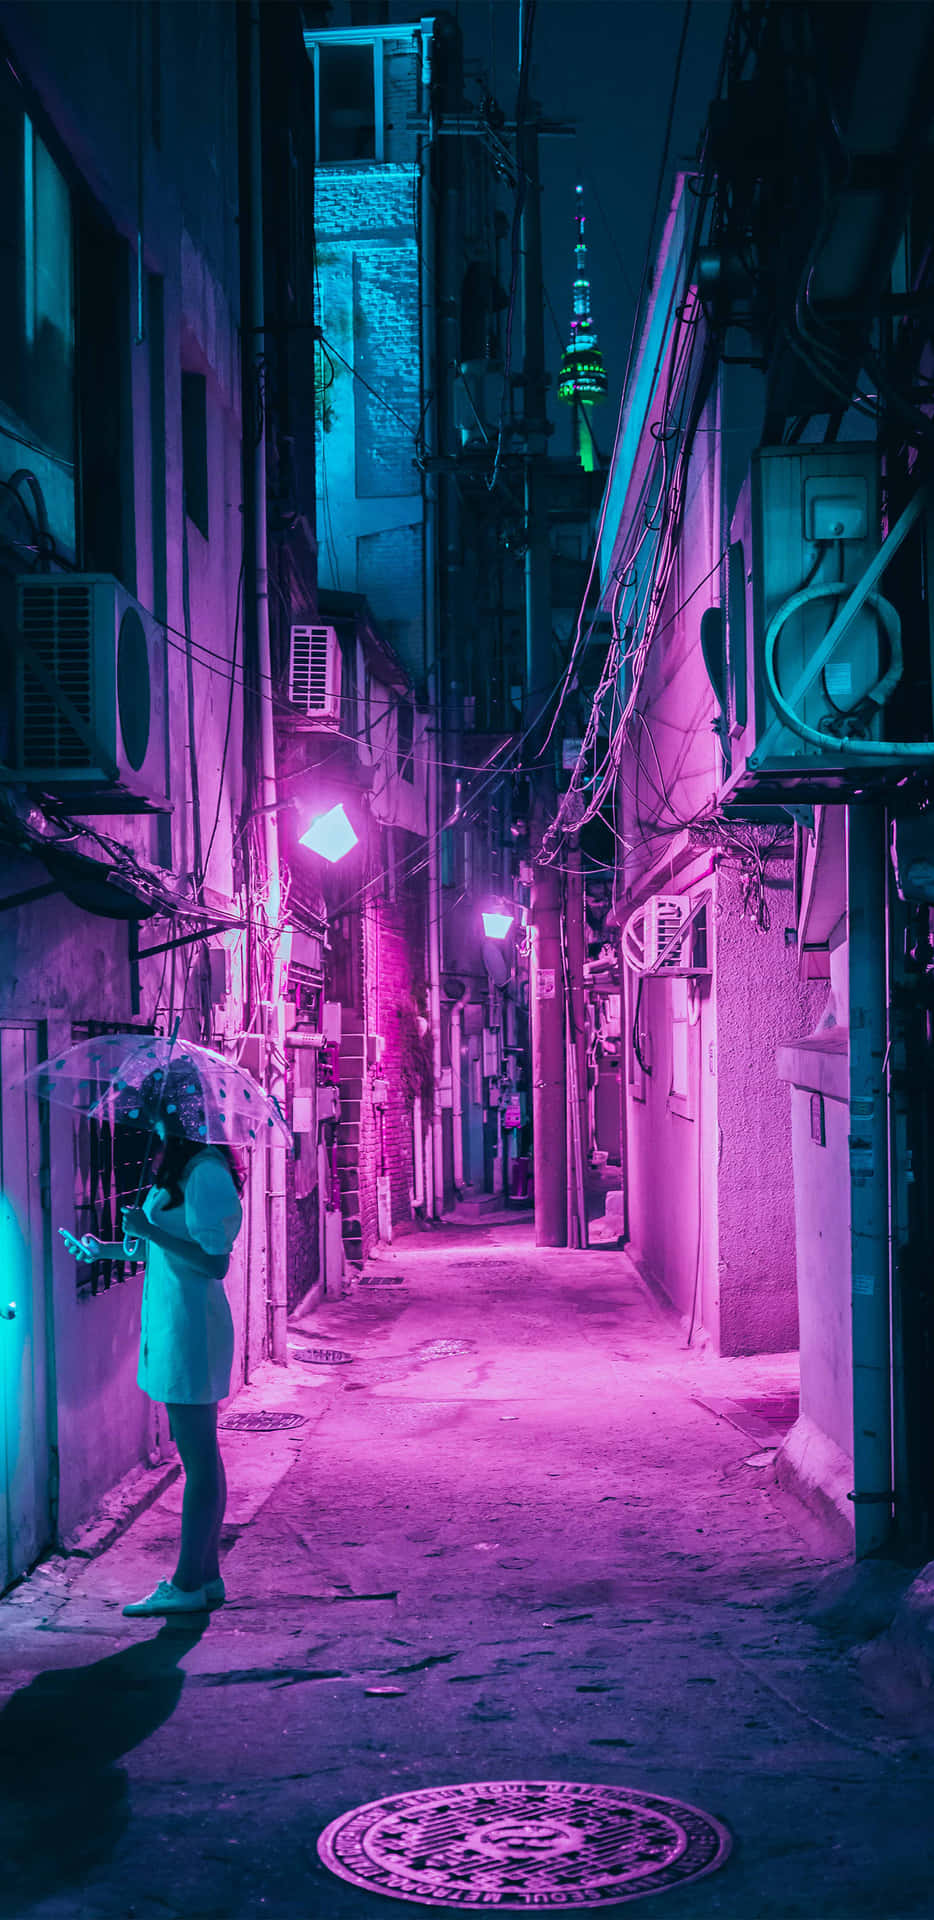 Download A Person Is Standing In An Alleyway Wallpaper | Wallpapers.com